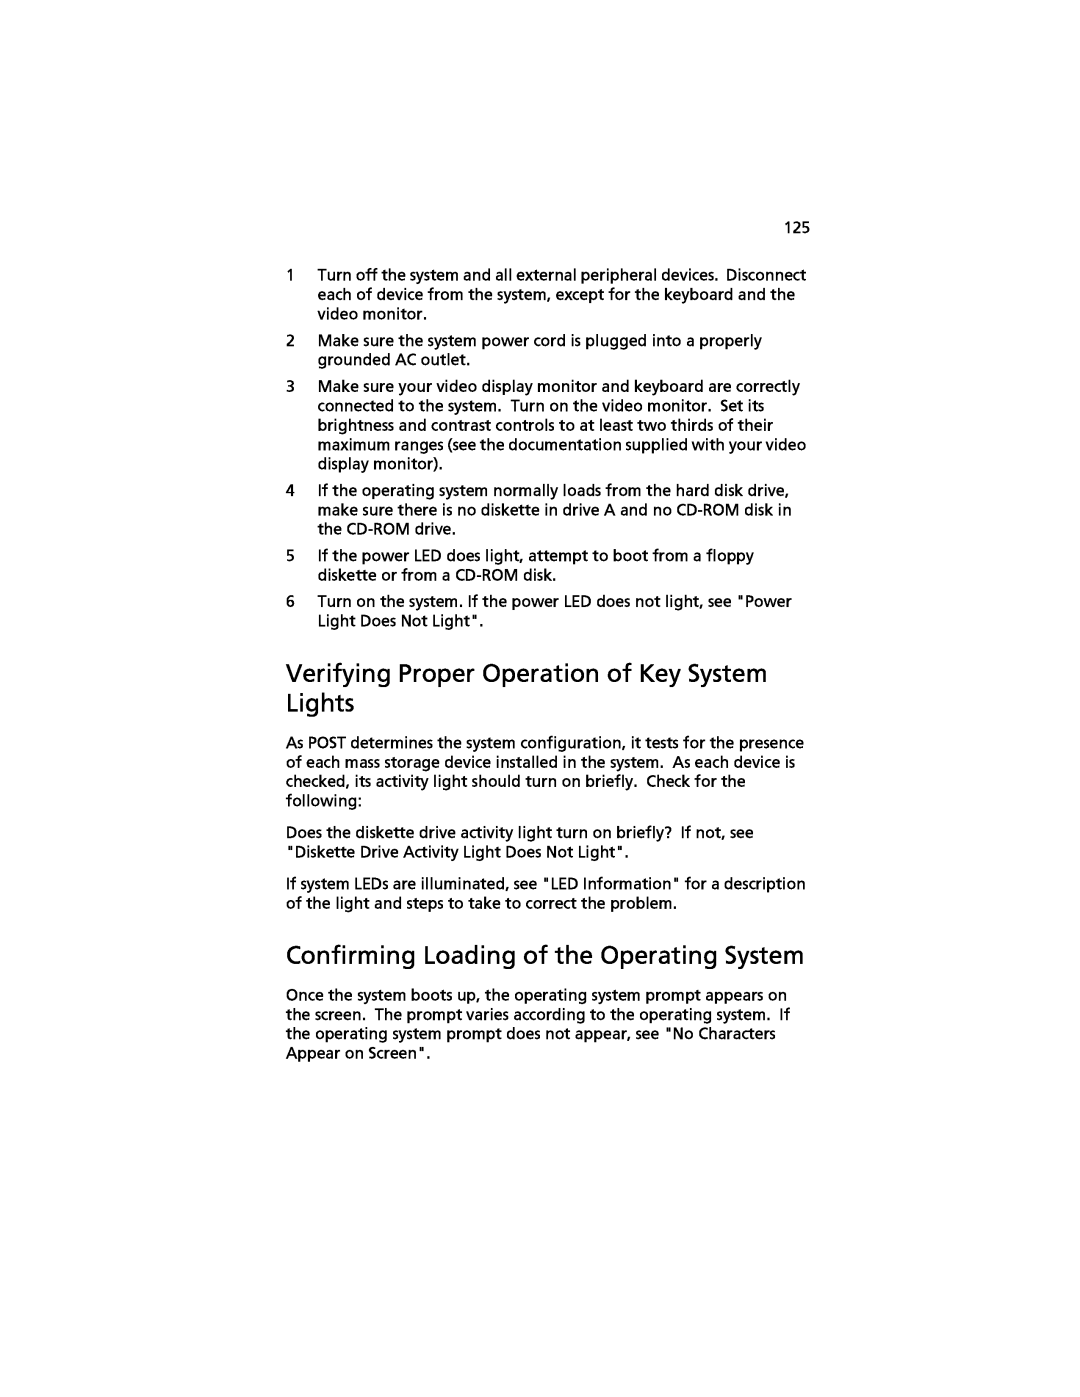 Acer G520 series manual Verifying Proper Operation of Key System Lights, Confirming Loading of the Operating System 